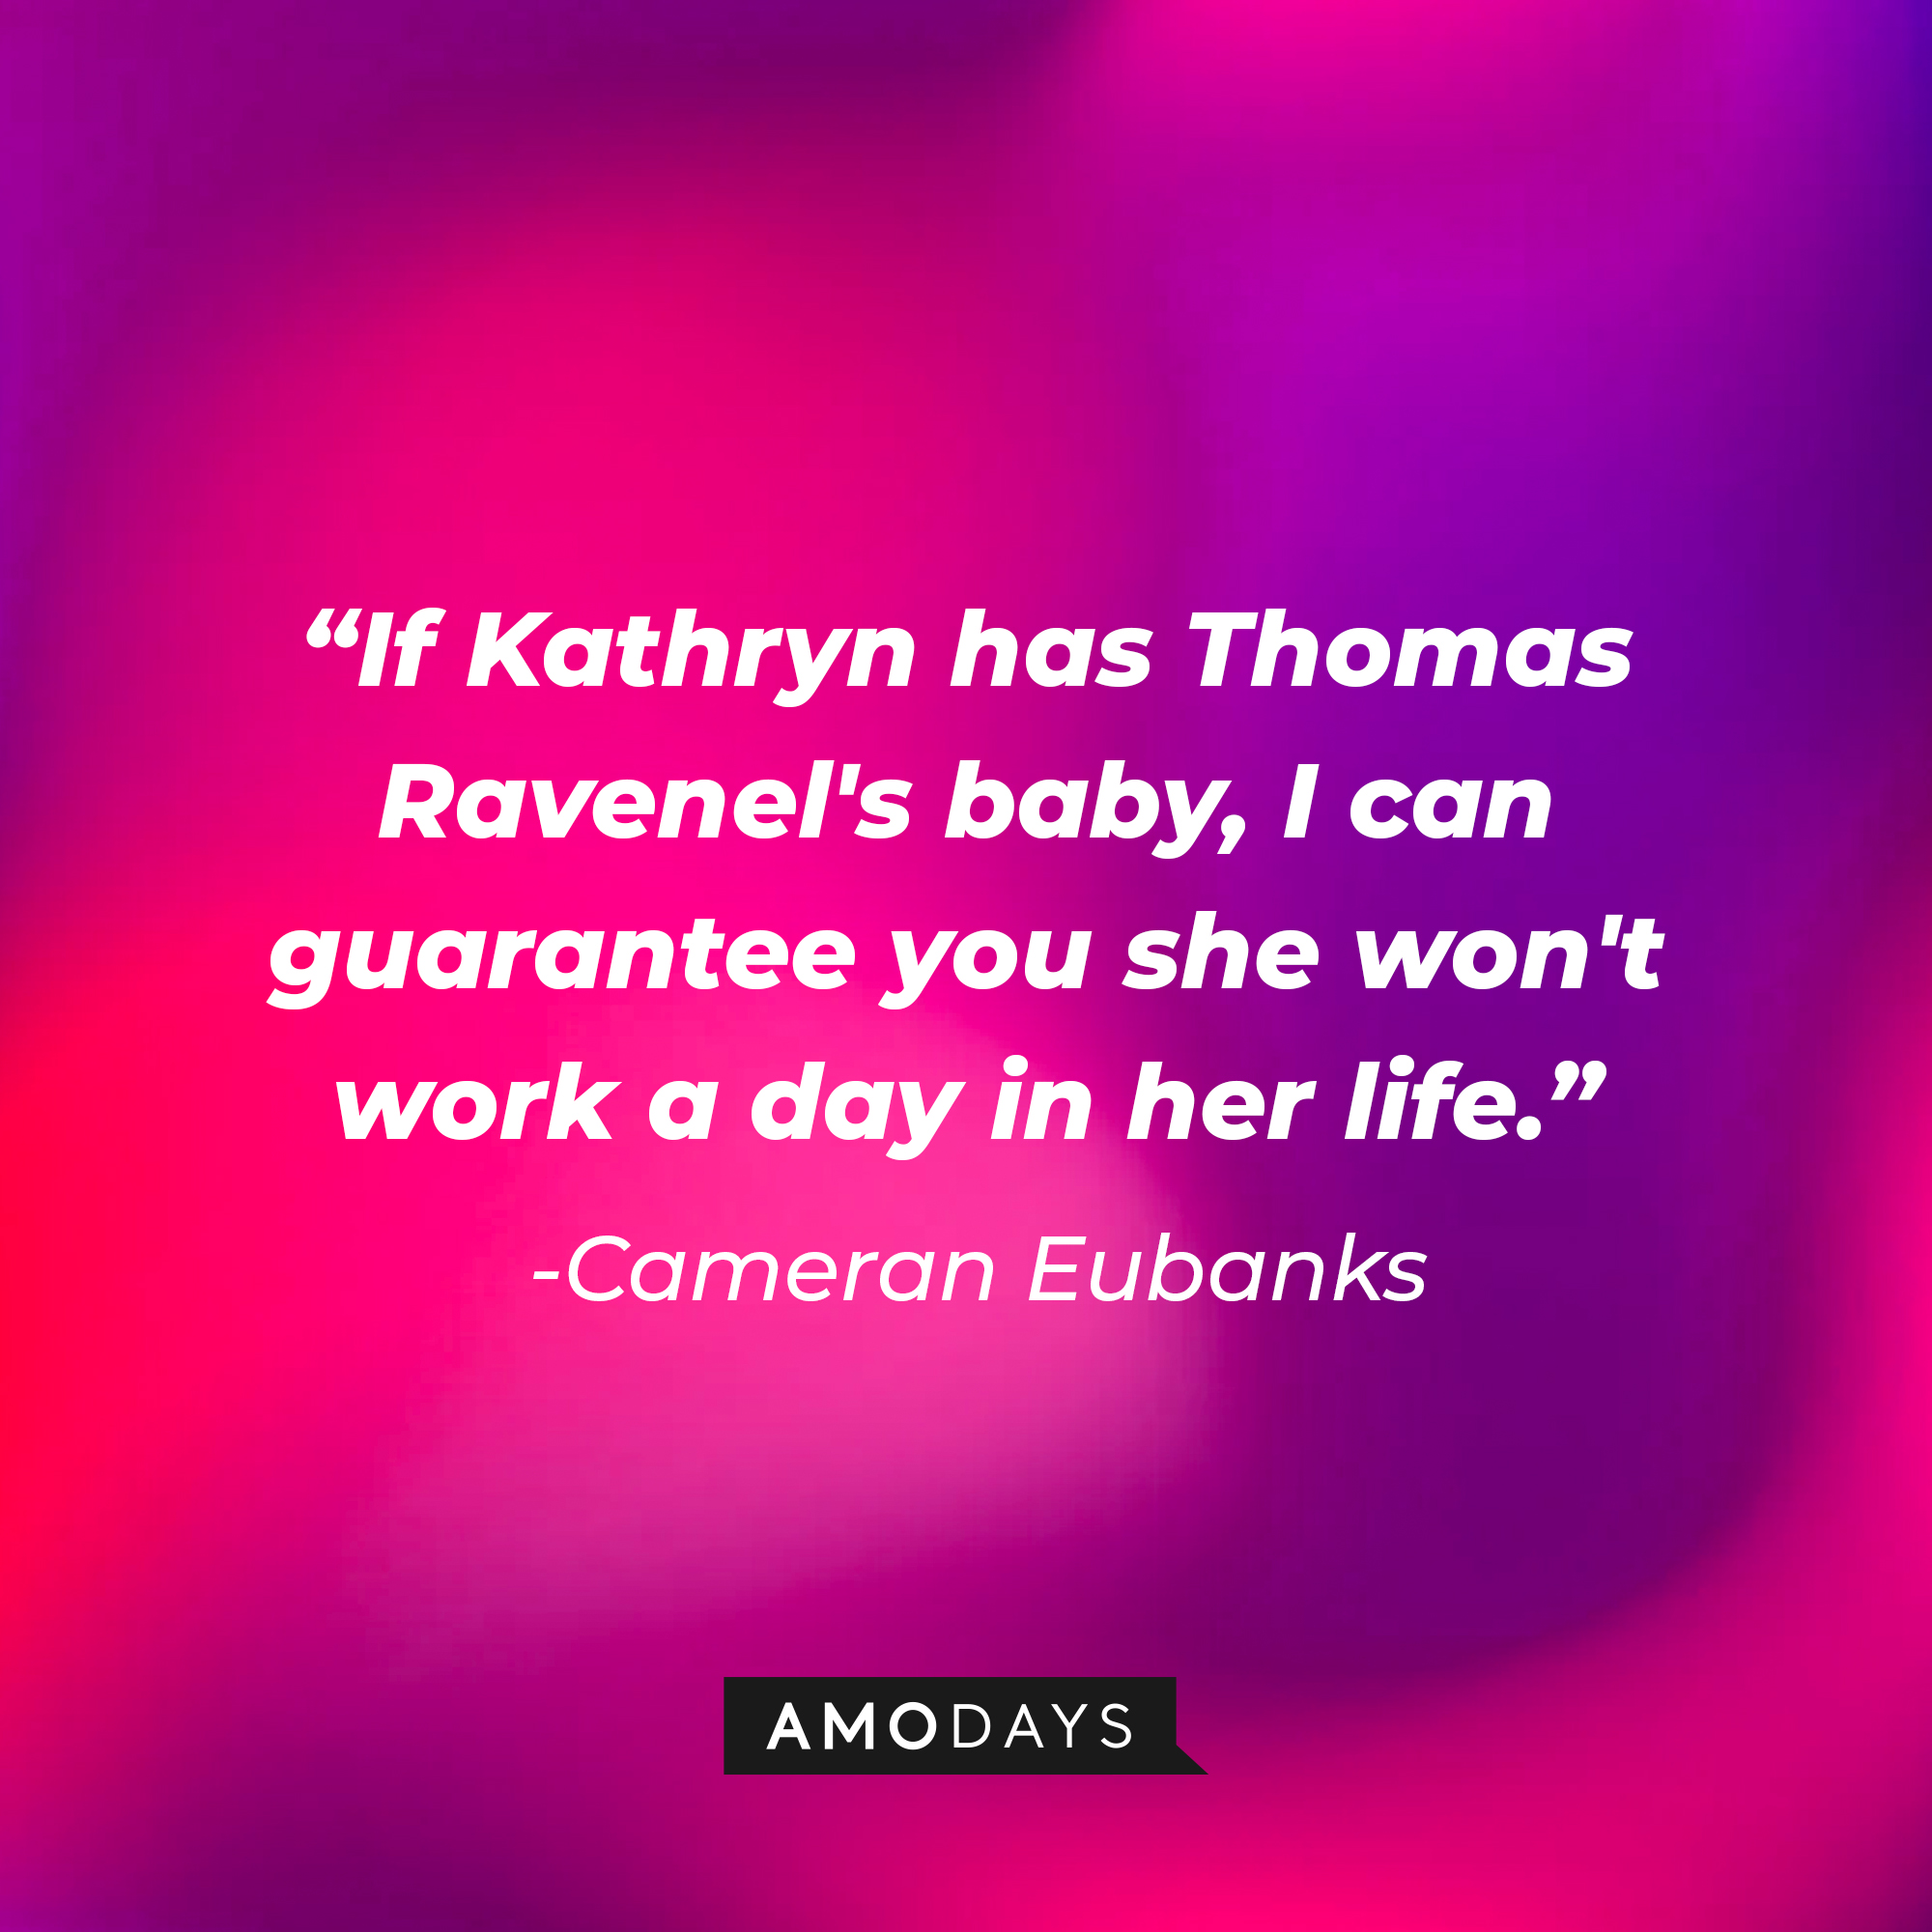 Camran Eubanks' quote: "If Kathryn has Thomas Ravenel's baby, I can guarantee you she won't work a day in her life." | Source: AmoDays